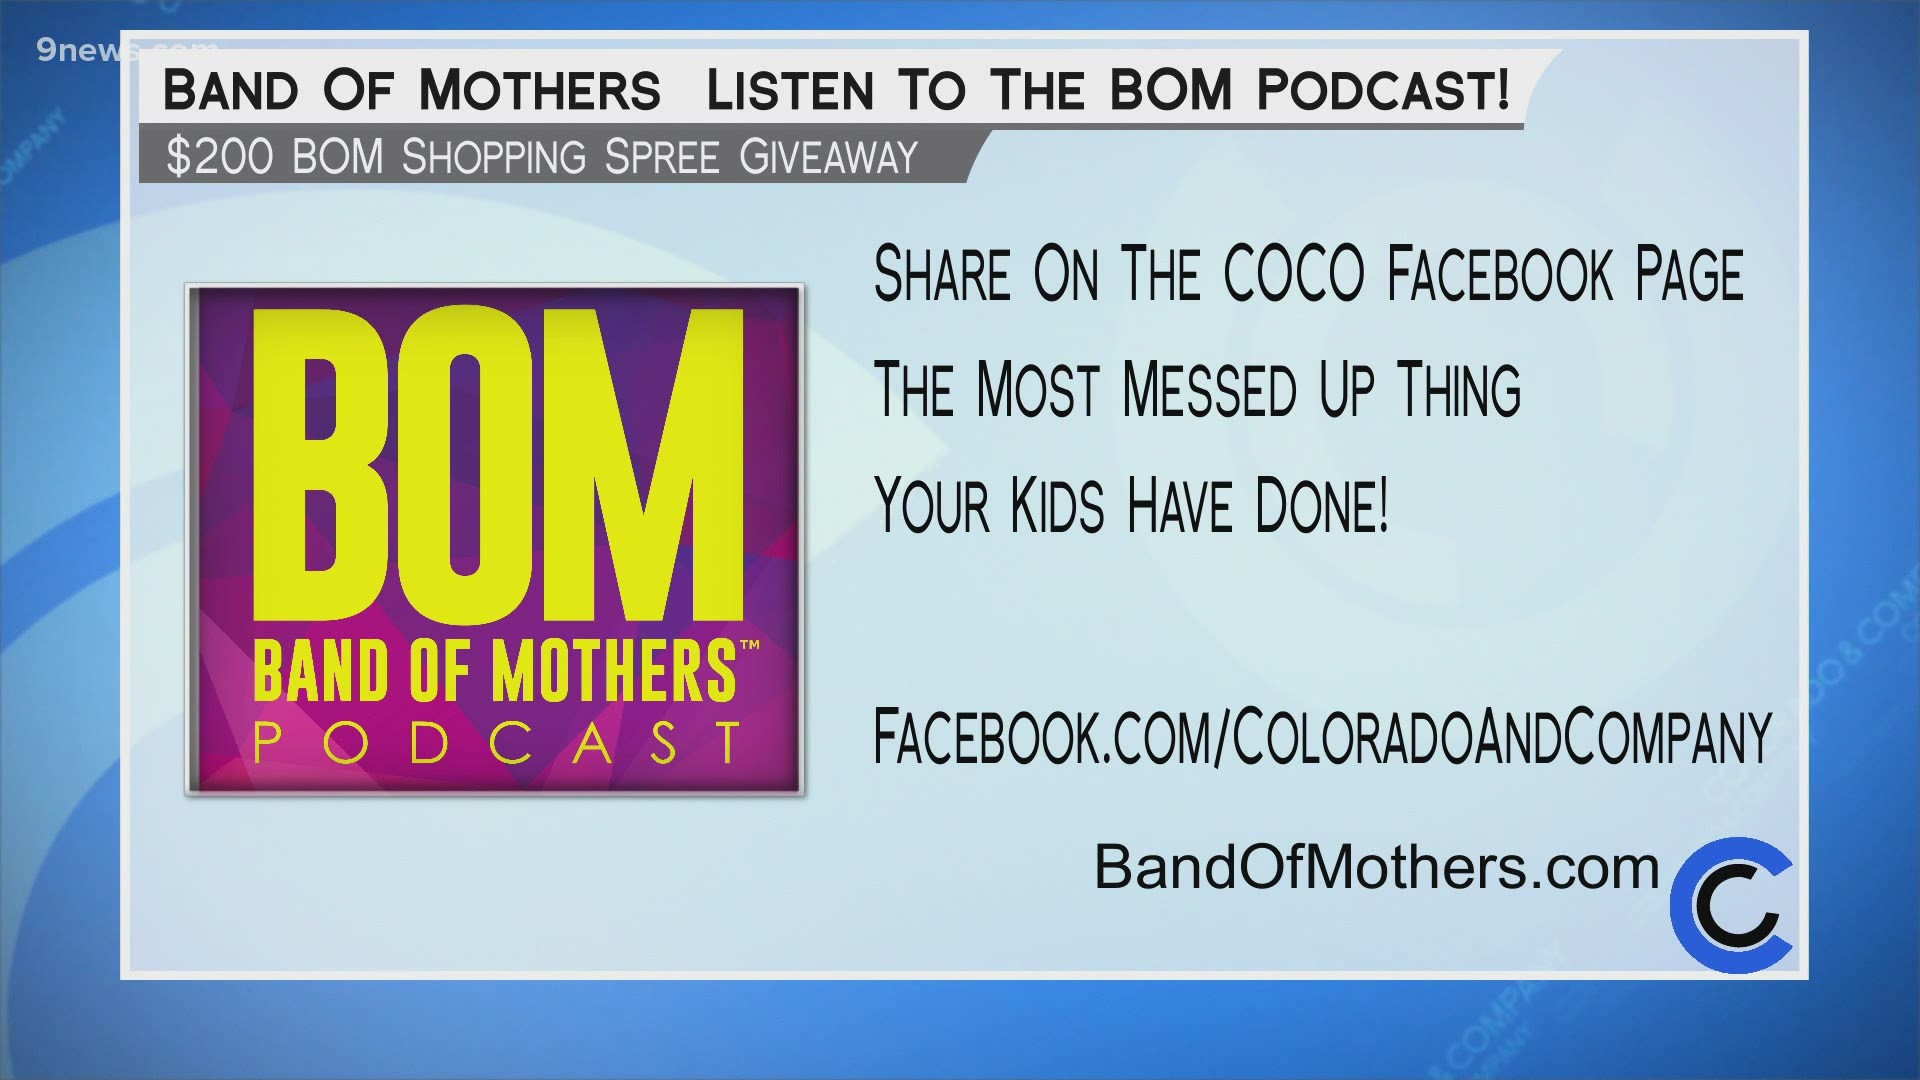 Listen and laugh along with Tracey and Shay's podcast at BandofMothers.com.